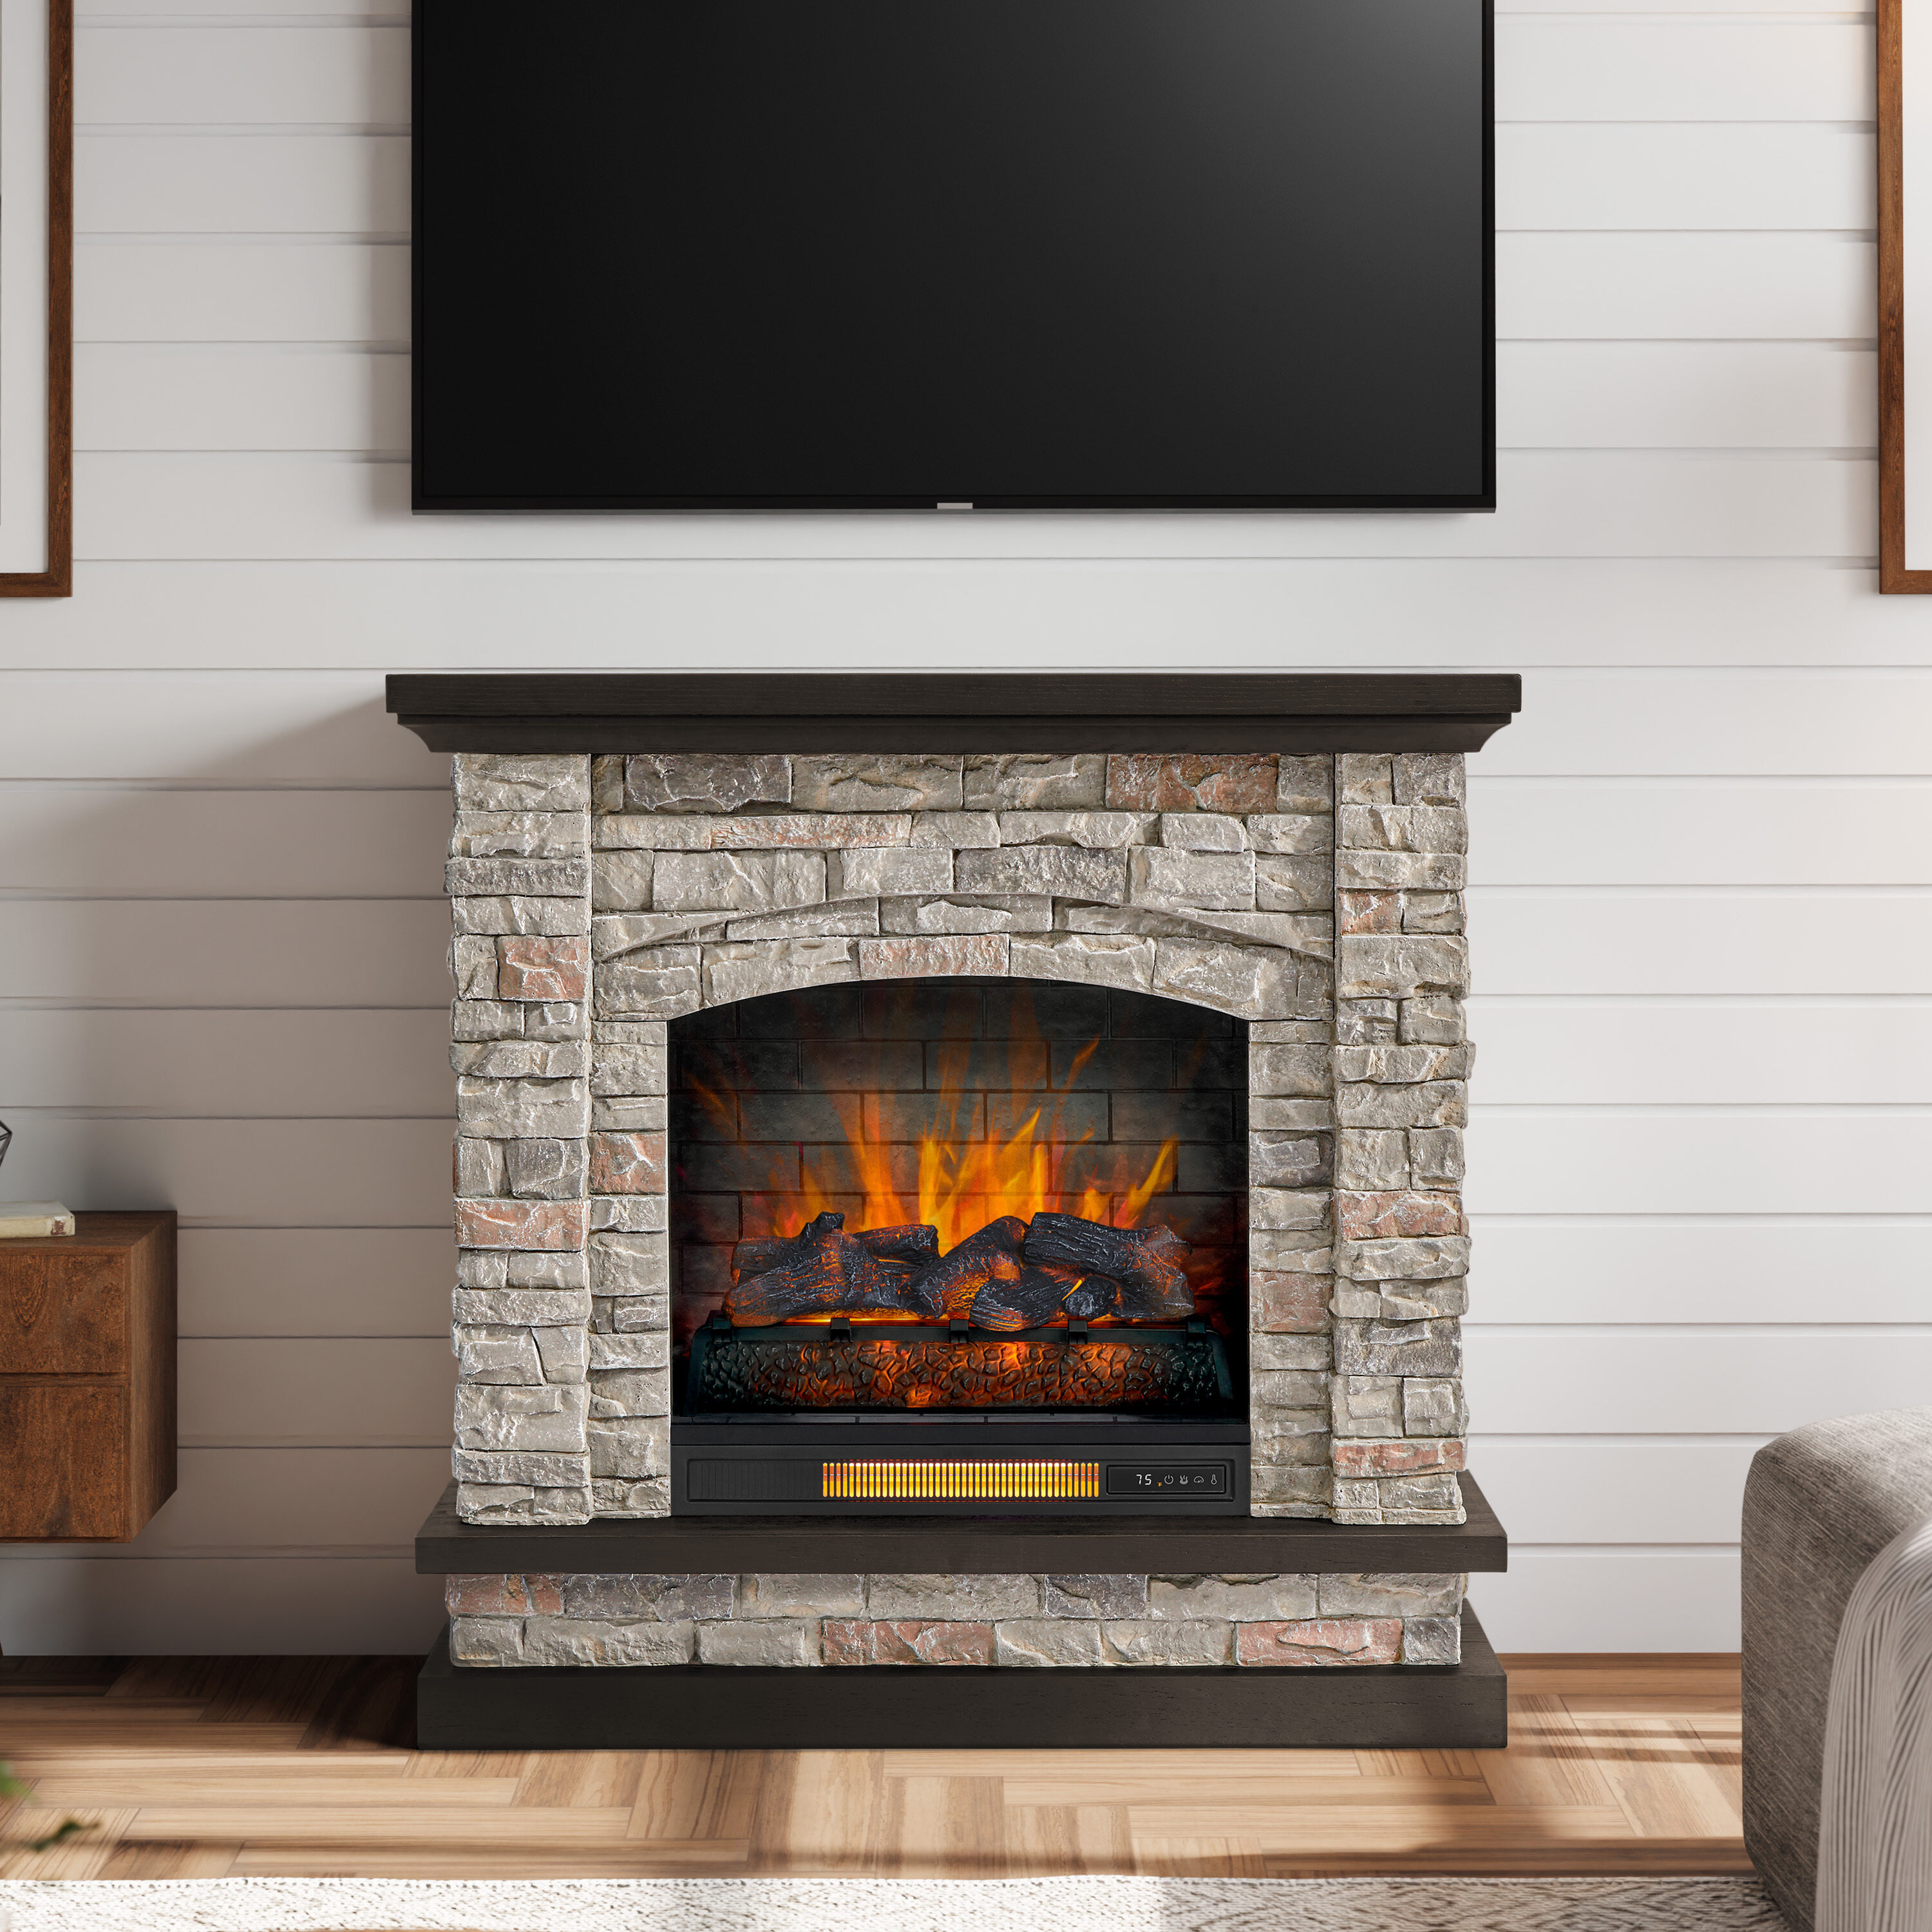 Choice of insulation behind electric fireplace